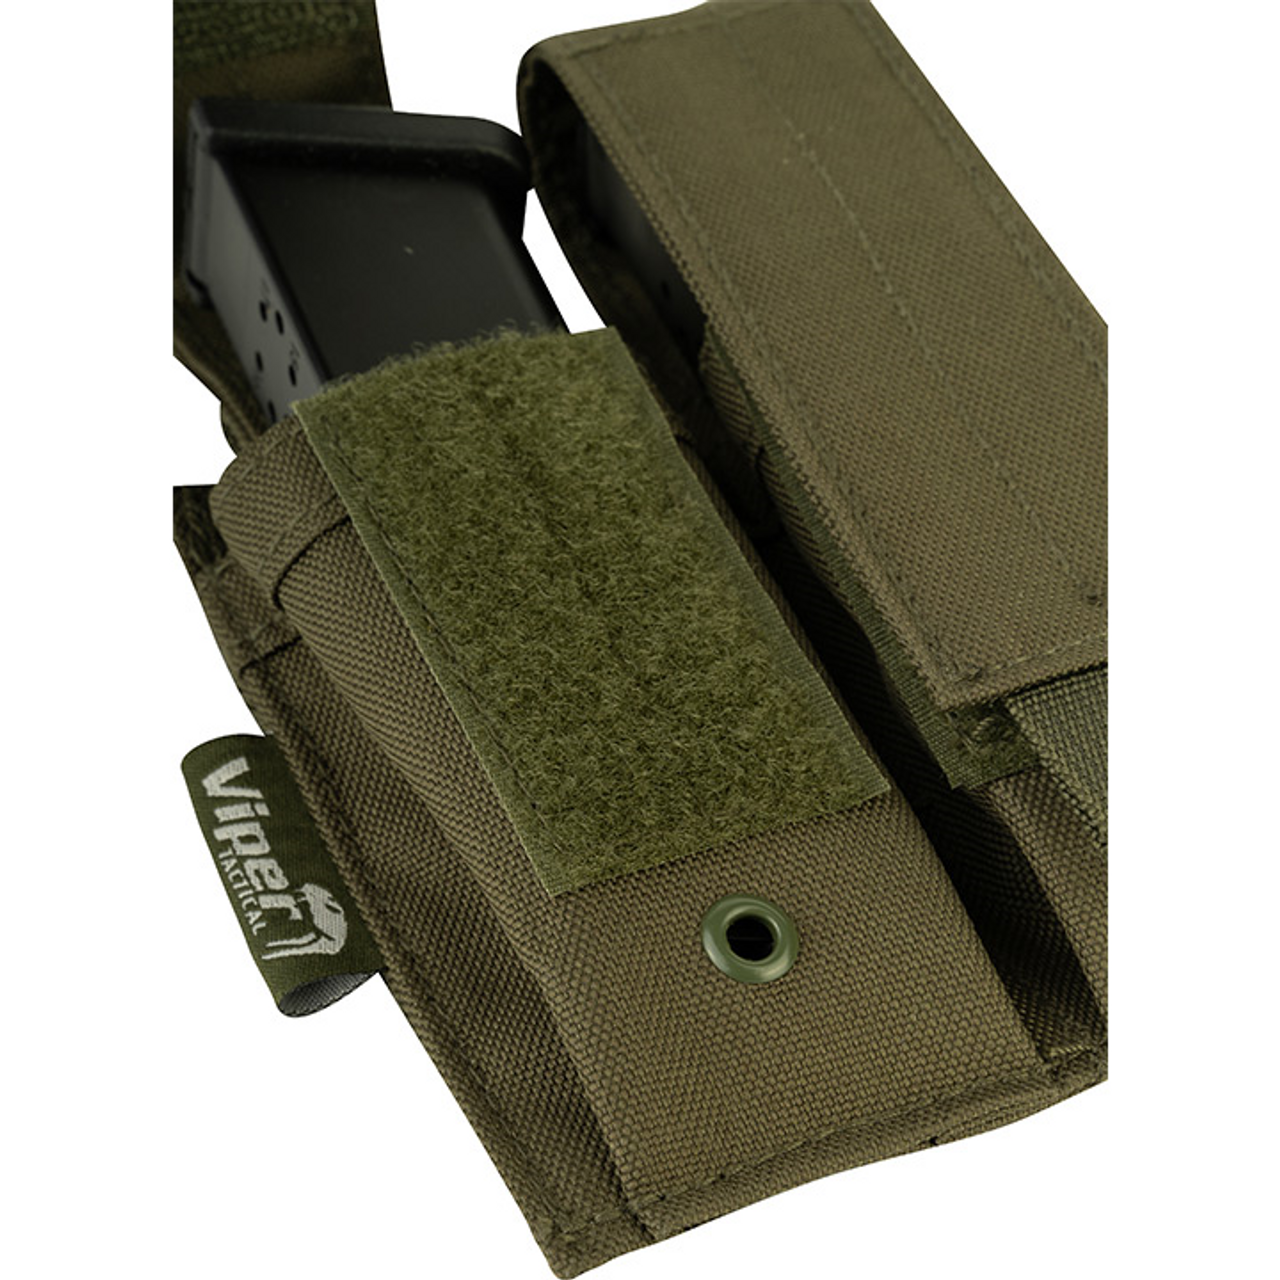 Viper Mod Double Pistol Mag Pouch - Olive Green